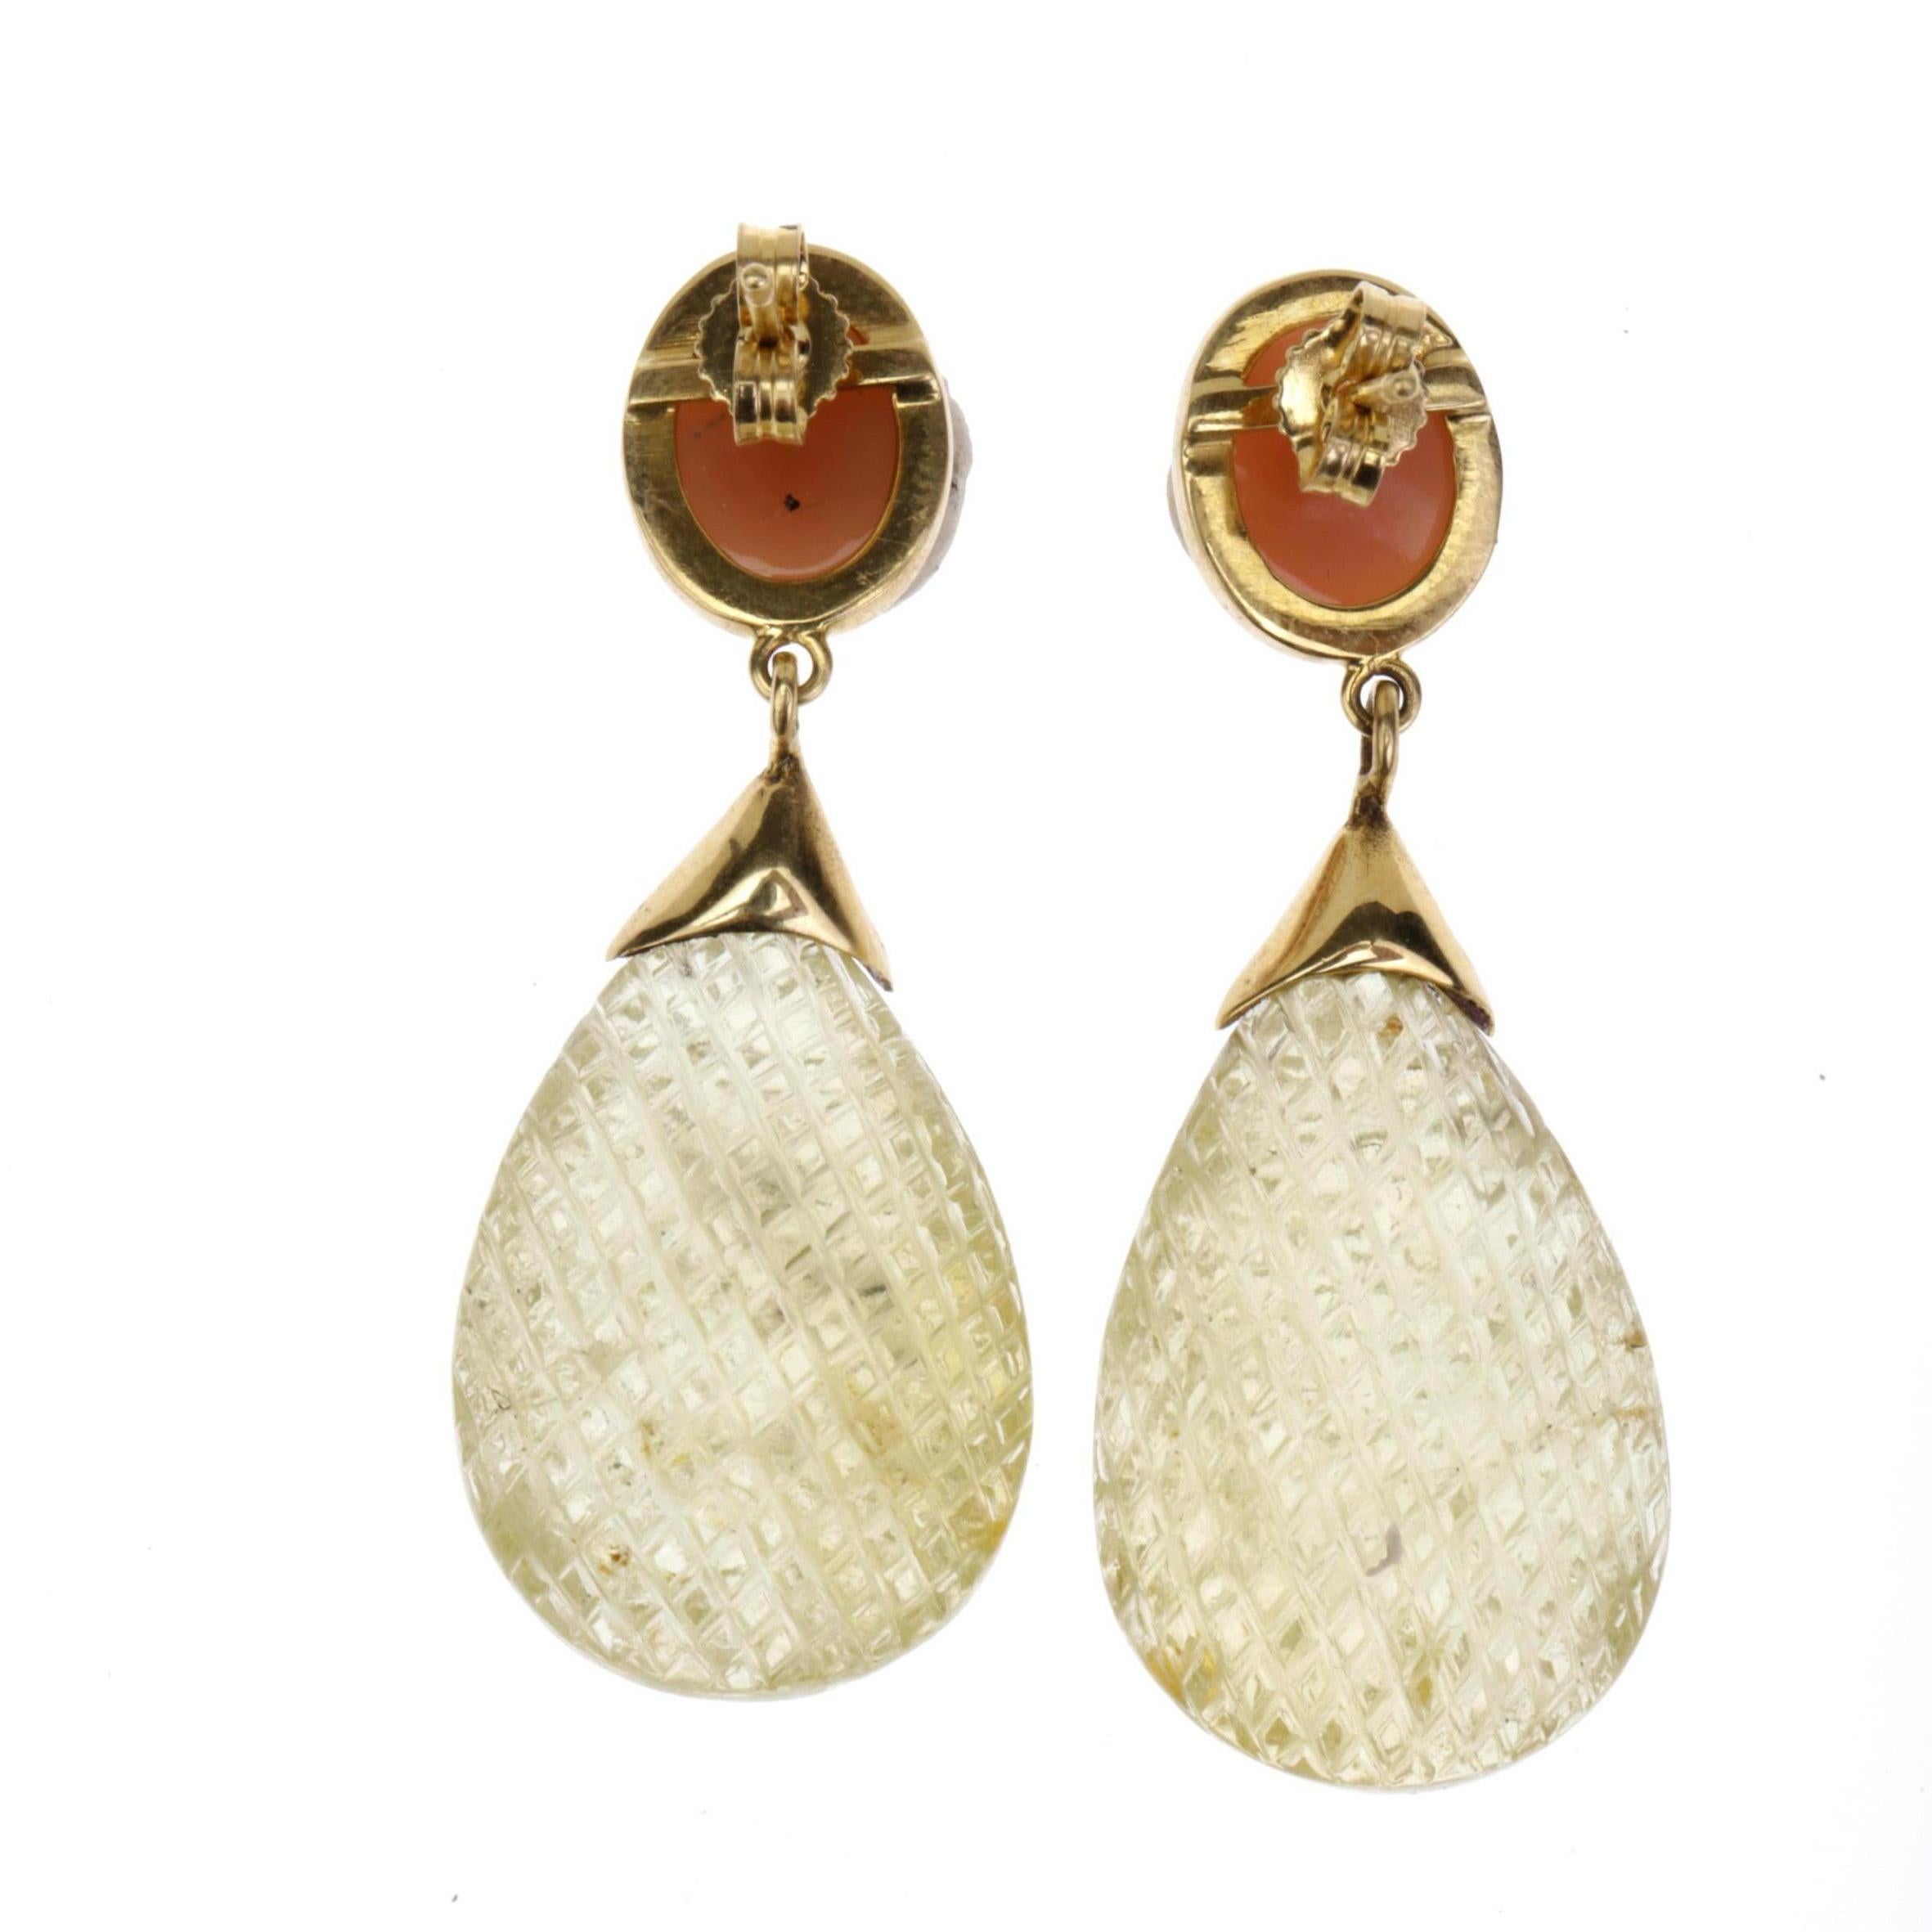 Carved Citrine Drop Opal 18 k Gold gr. 6,40.
All Giulia Colussi jewelry is new and has never been previously owned or worn. Each item will arrive at your door beautifully gift wrapped in our boxes, put inside an elegant pouch or jewel box.
